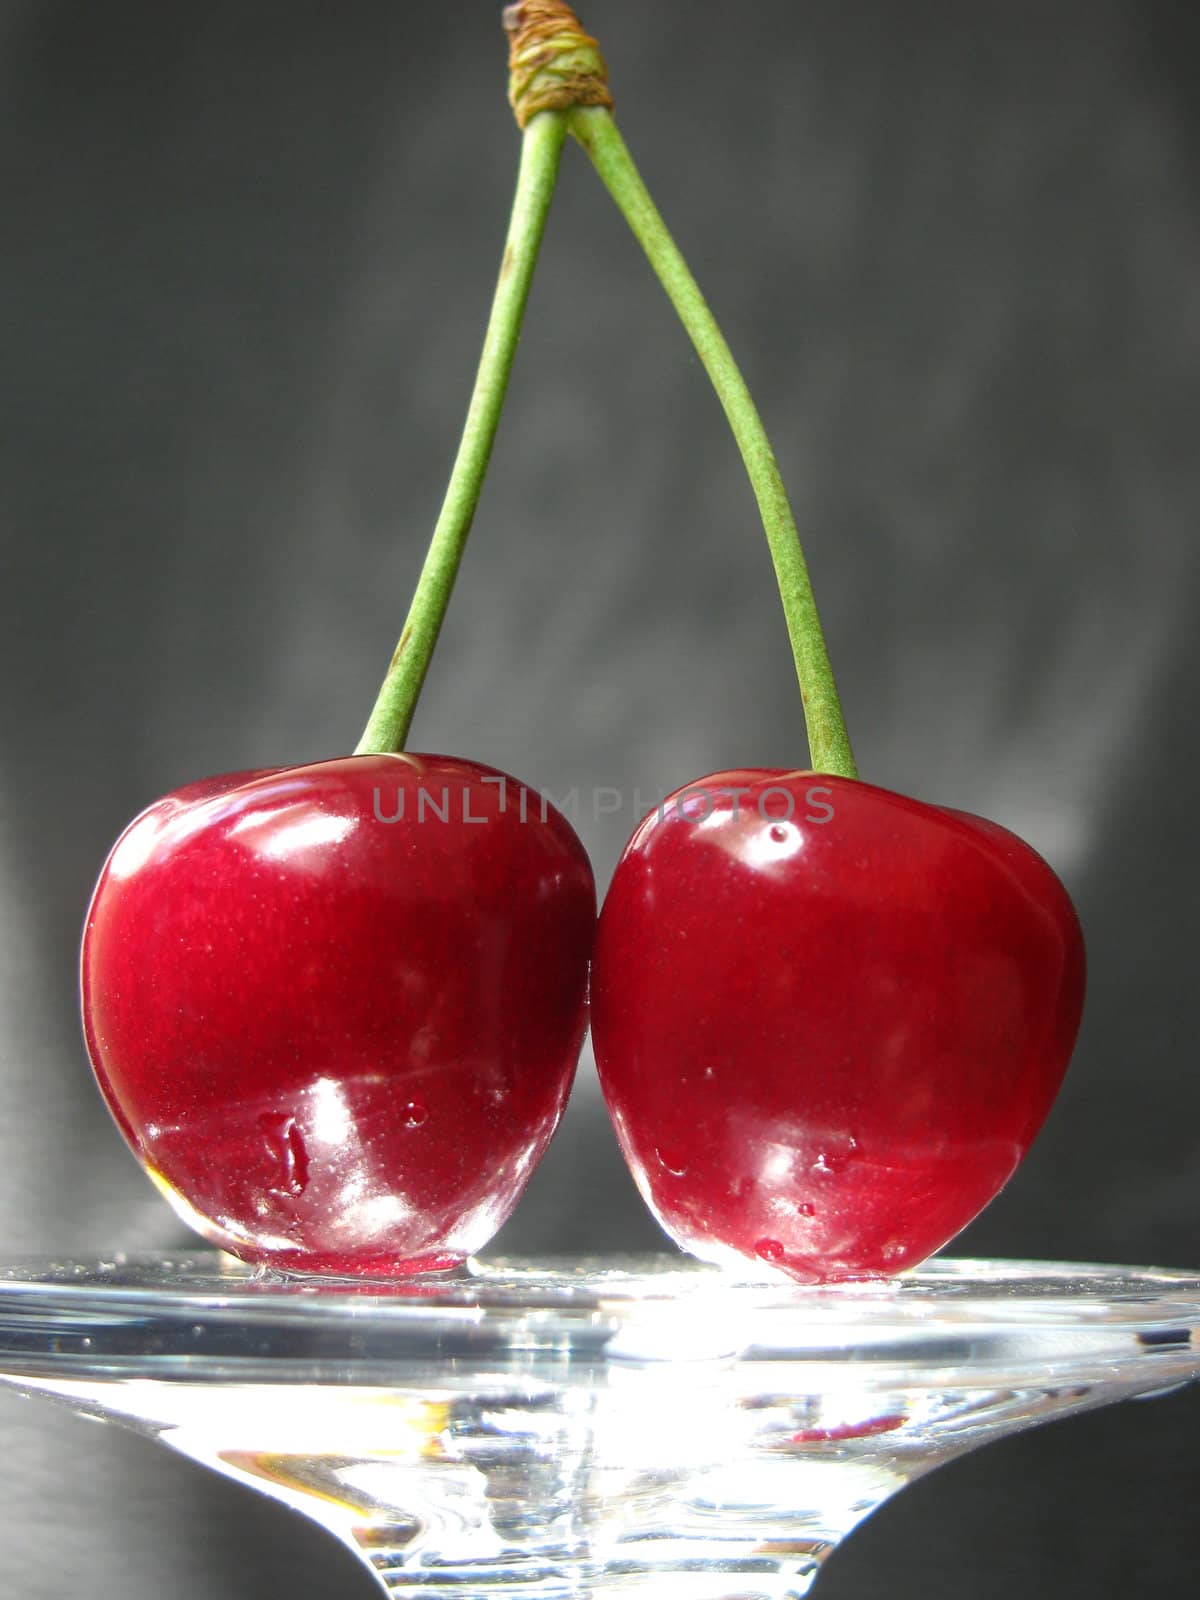 two cherries in light over grey background